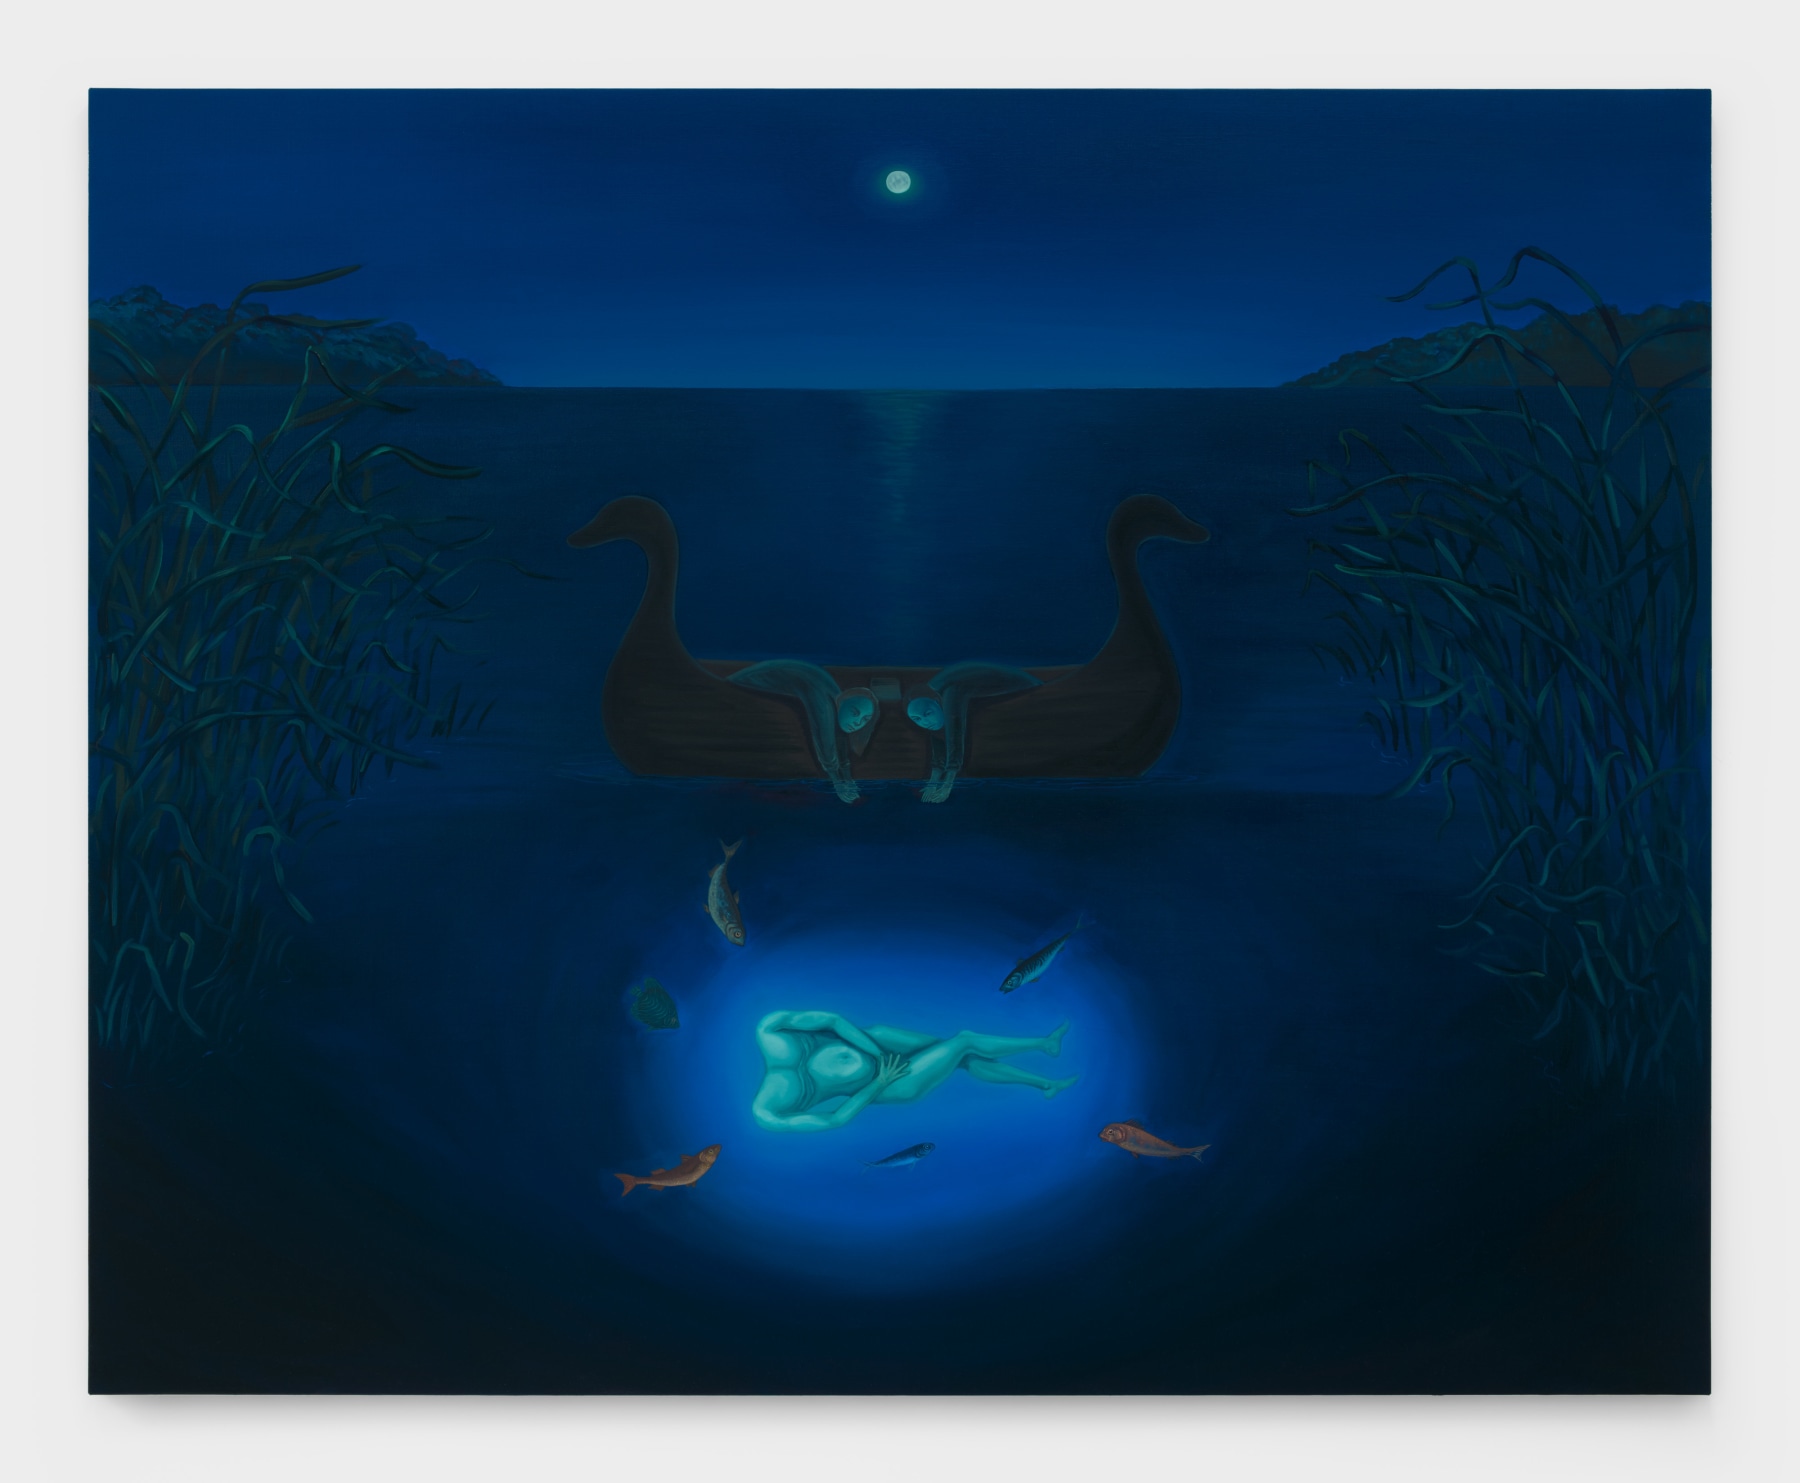 Bambou Gili's artwork "In the Reeds". A headless body glows underwater surrounded by fish with the arms of two women extended towards it from a boat on the surface. 70 x 87 in (177.8 x 220 cm), oil on linen, 2022